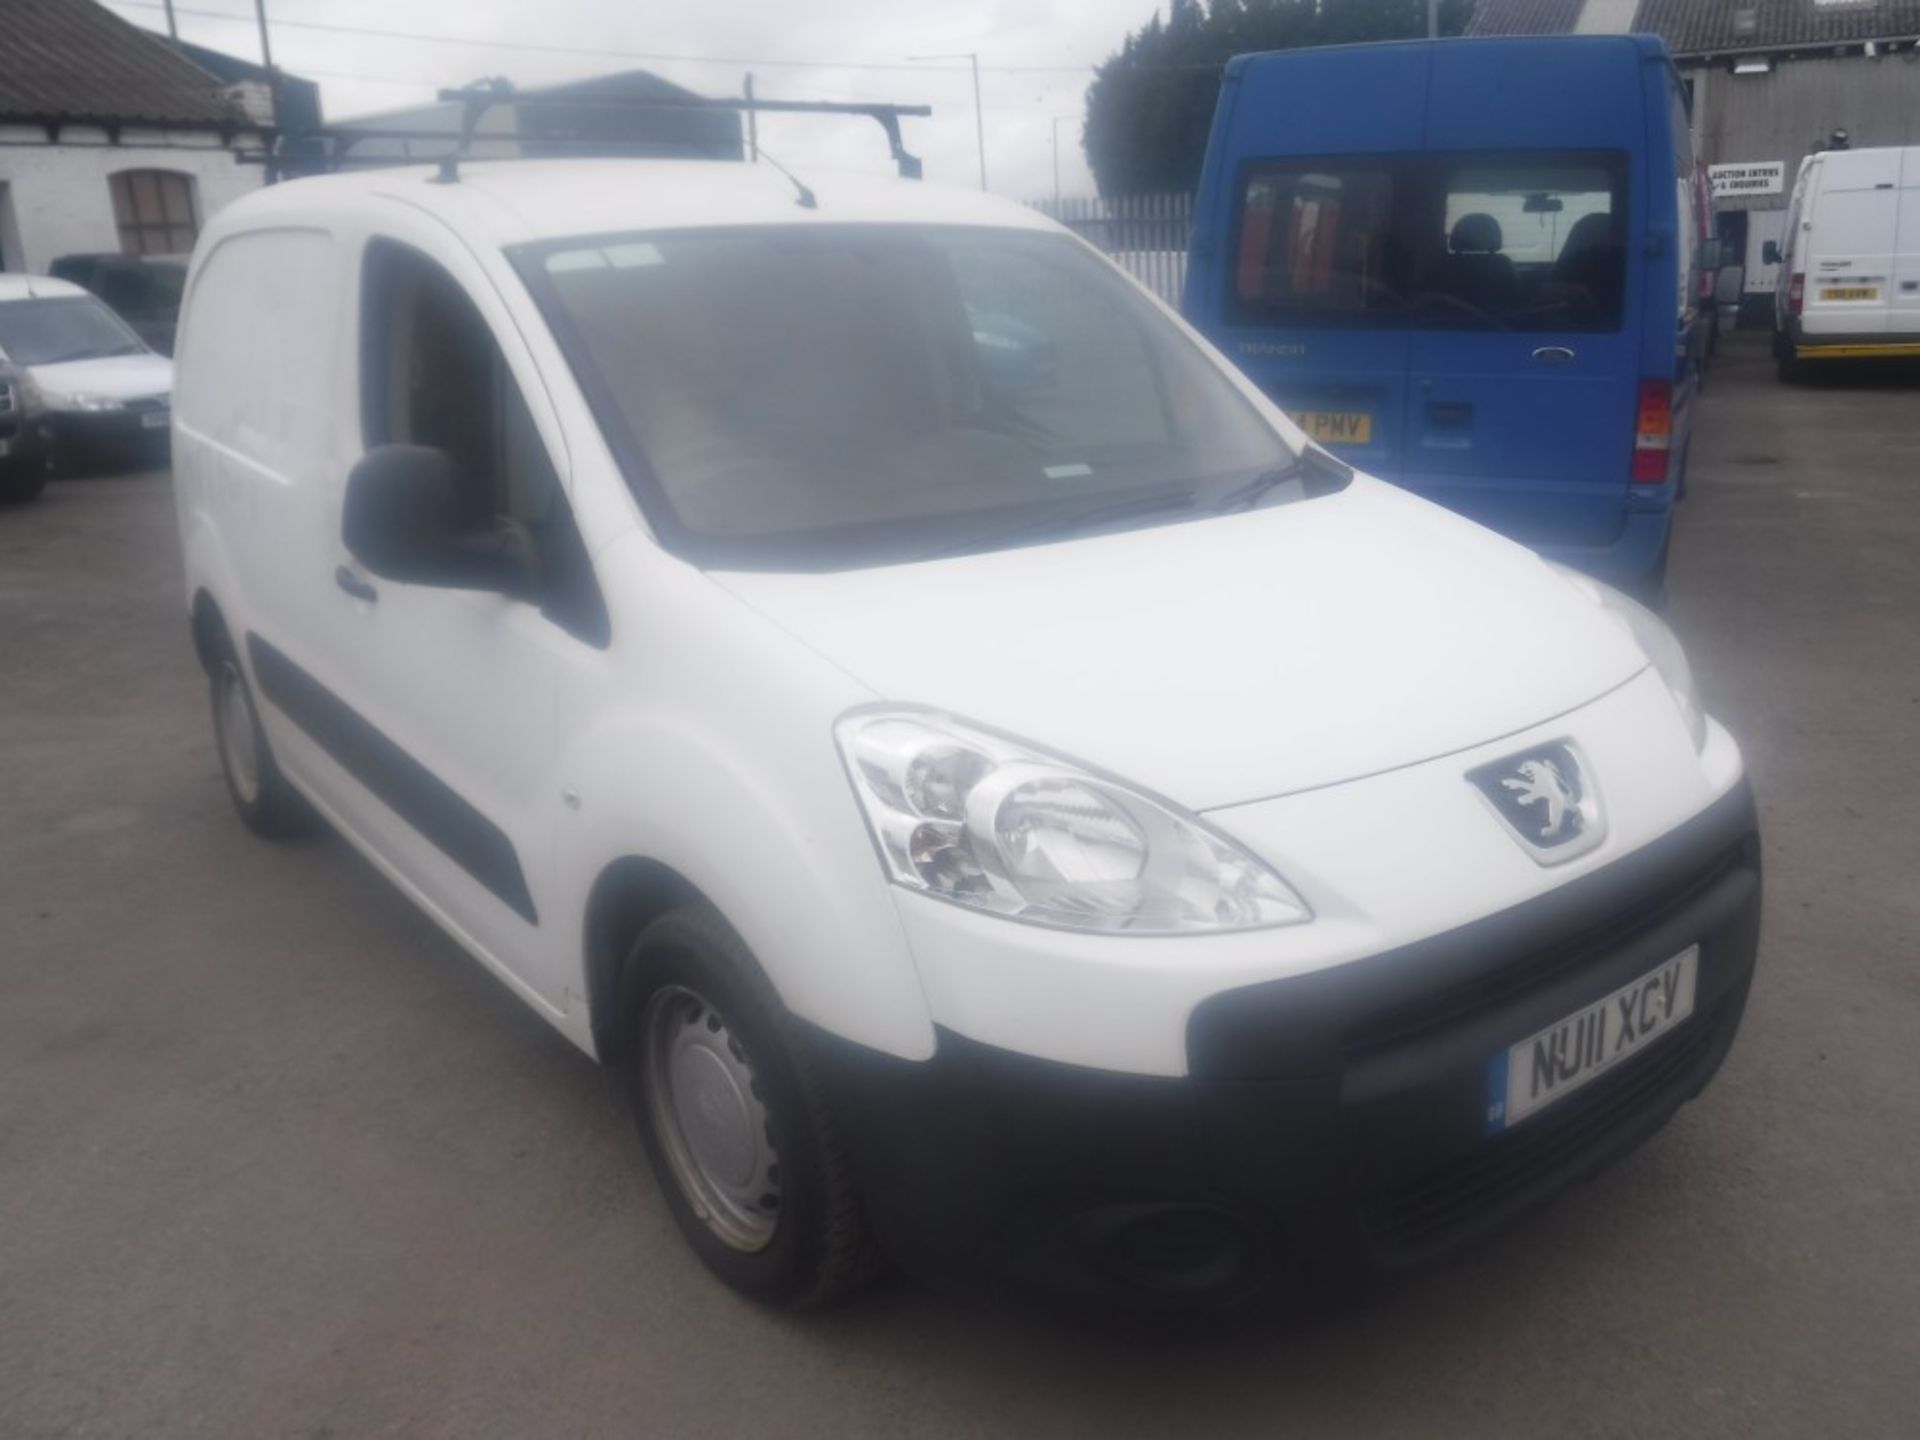 11 reg PEUGEOT PARTNER 850S HDI, 1ST REG 04/11, 135267M NOT WARRANTED, V5 HERE, 2 FORMER KEEPERS [NO